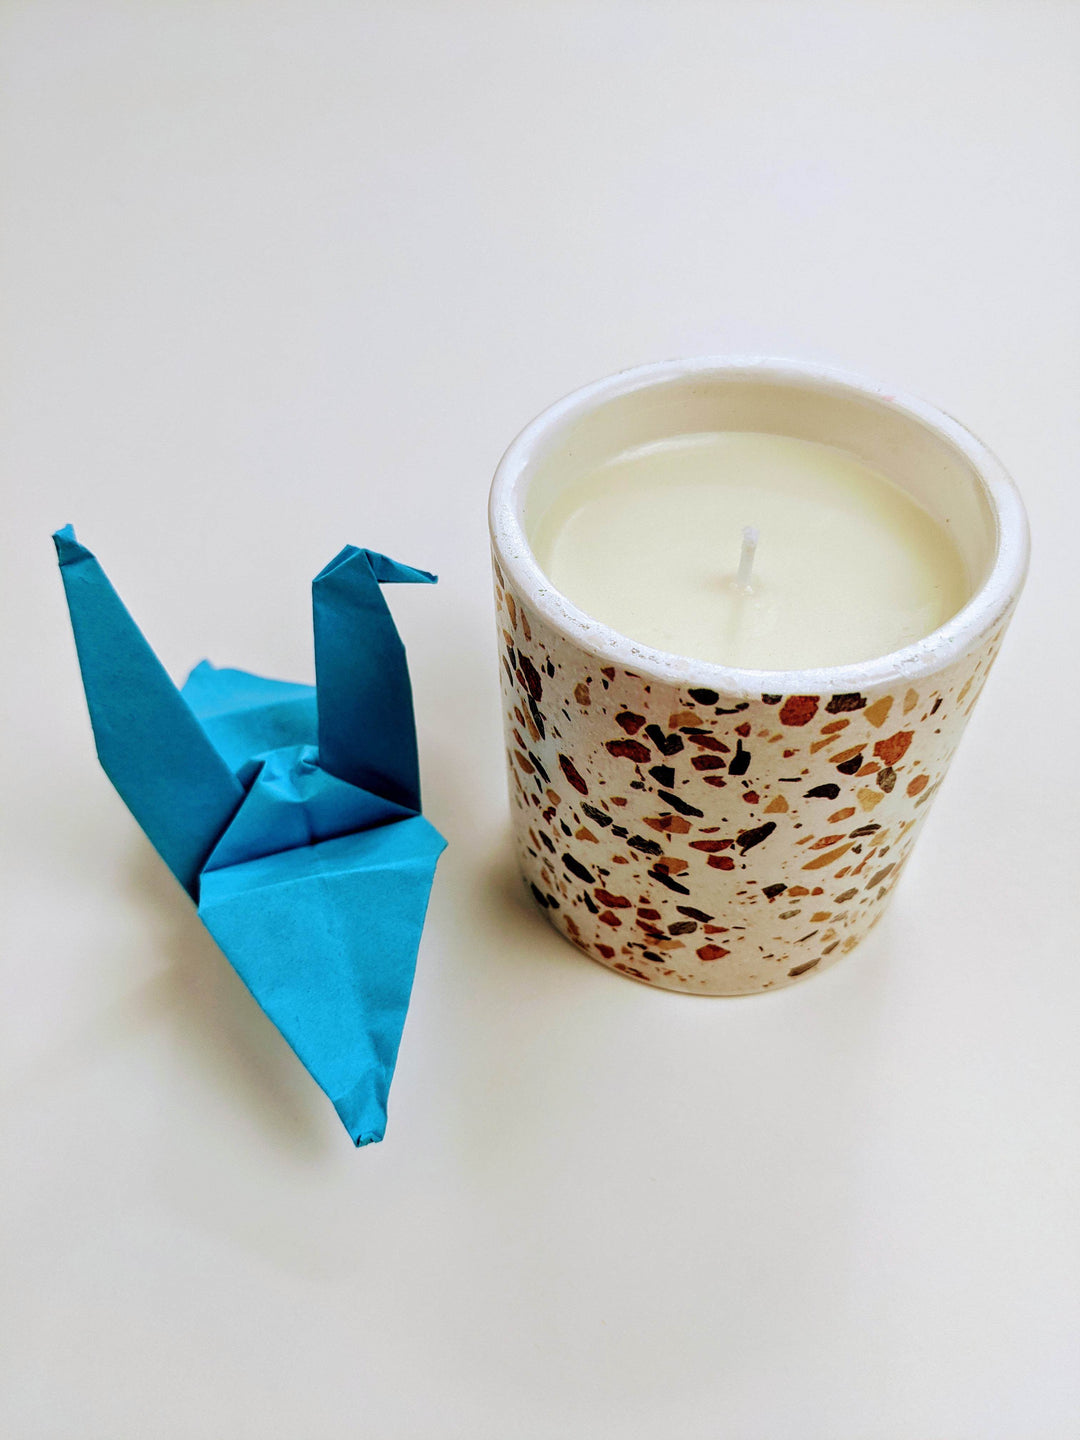 a white speckled candle next to a blue paper crane